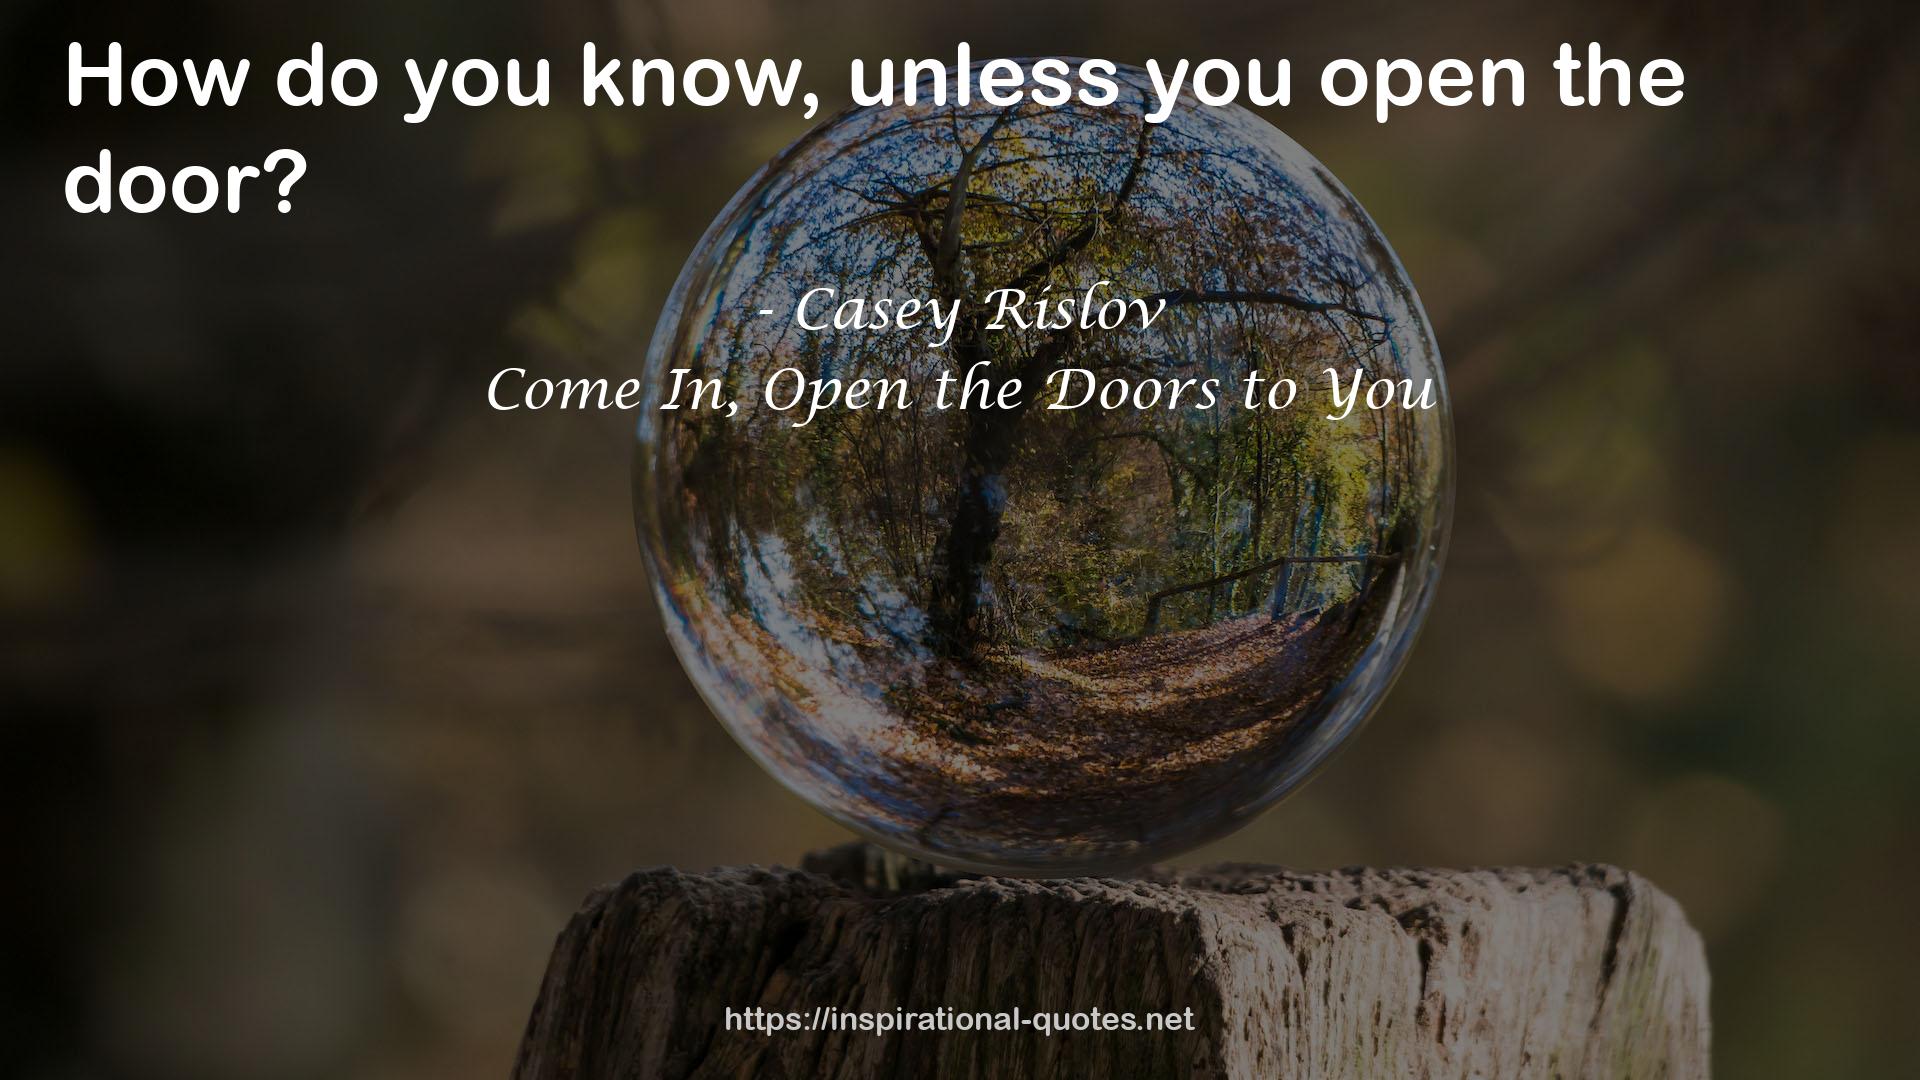 Come In, Open the Doors to You QUOTES